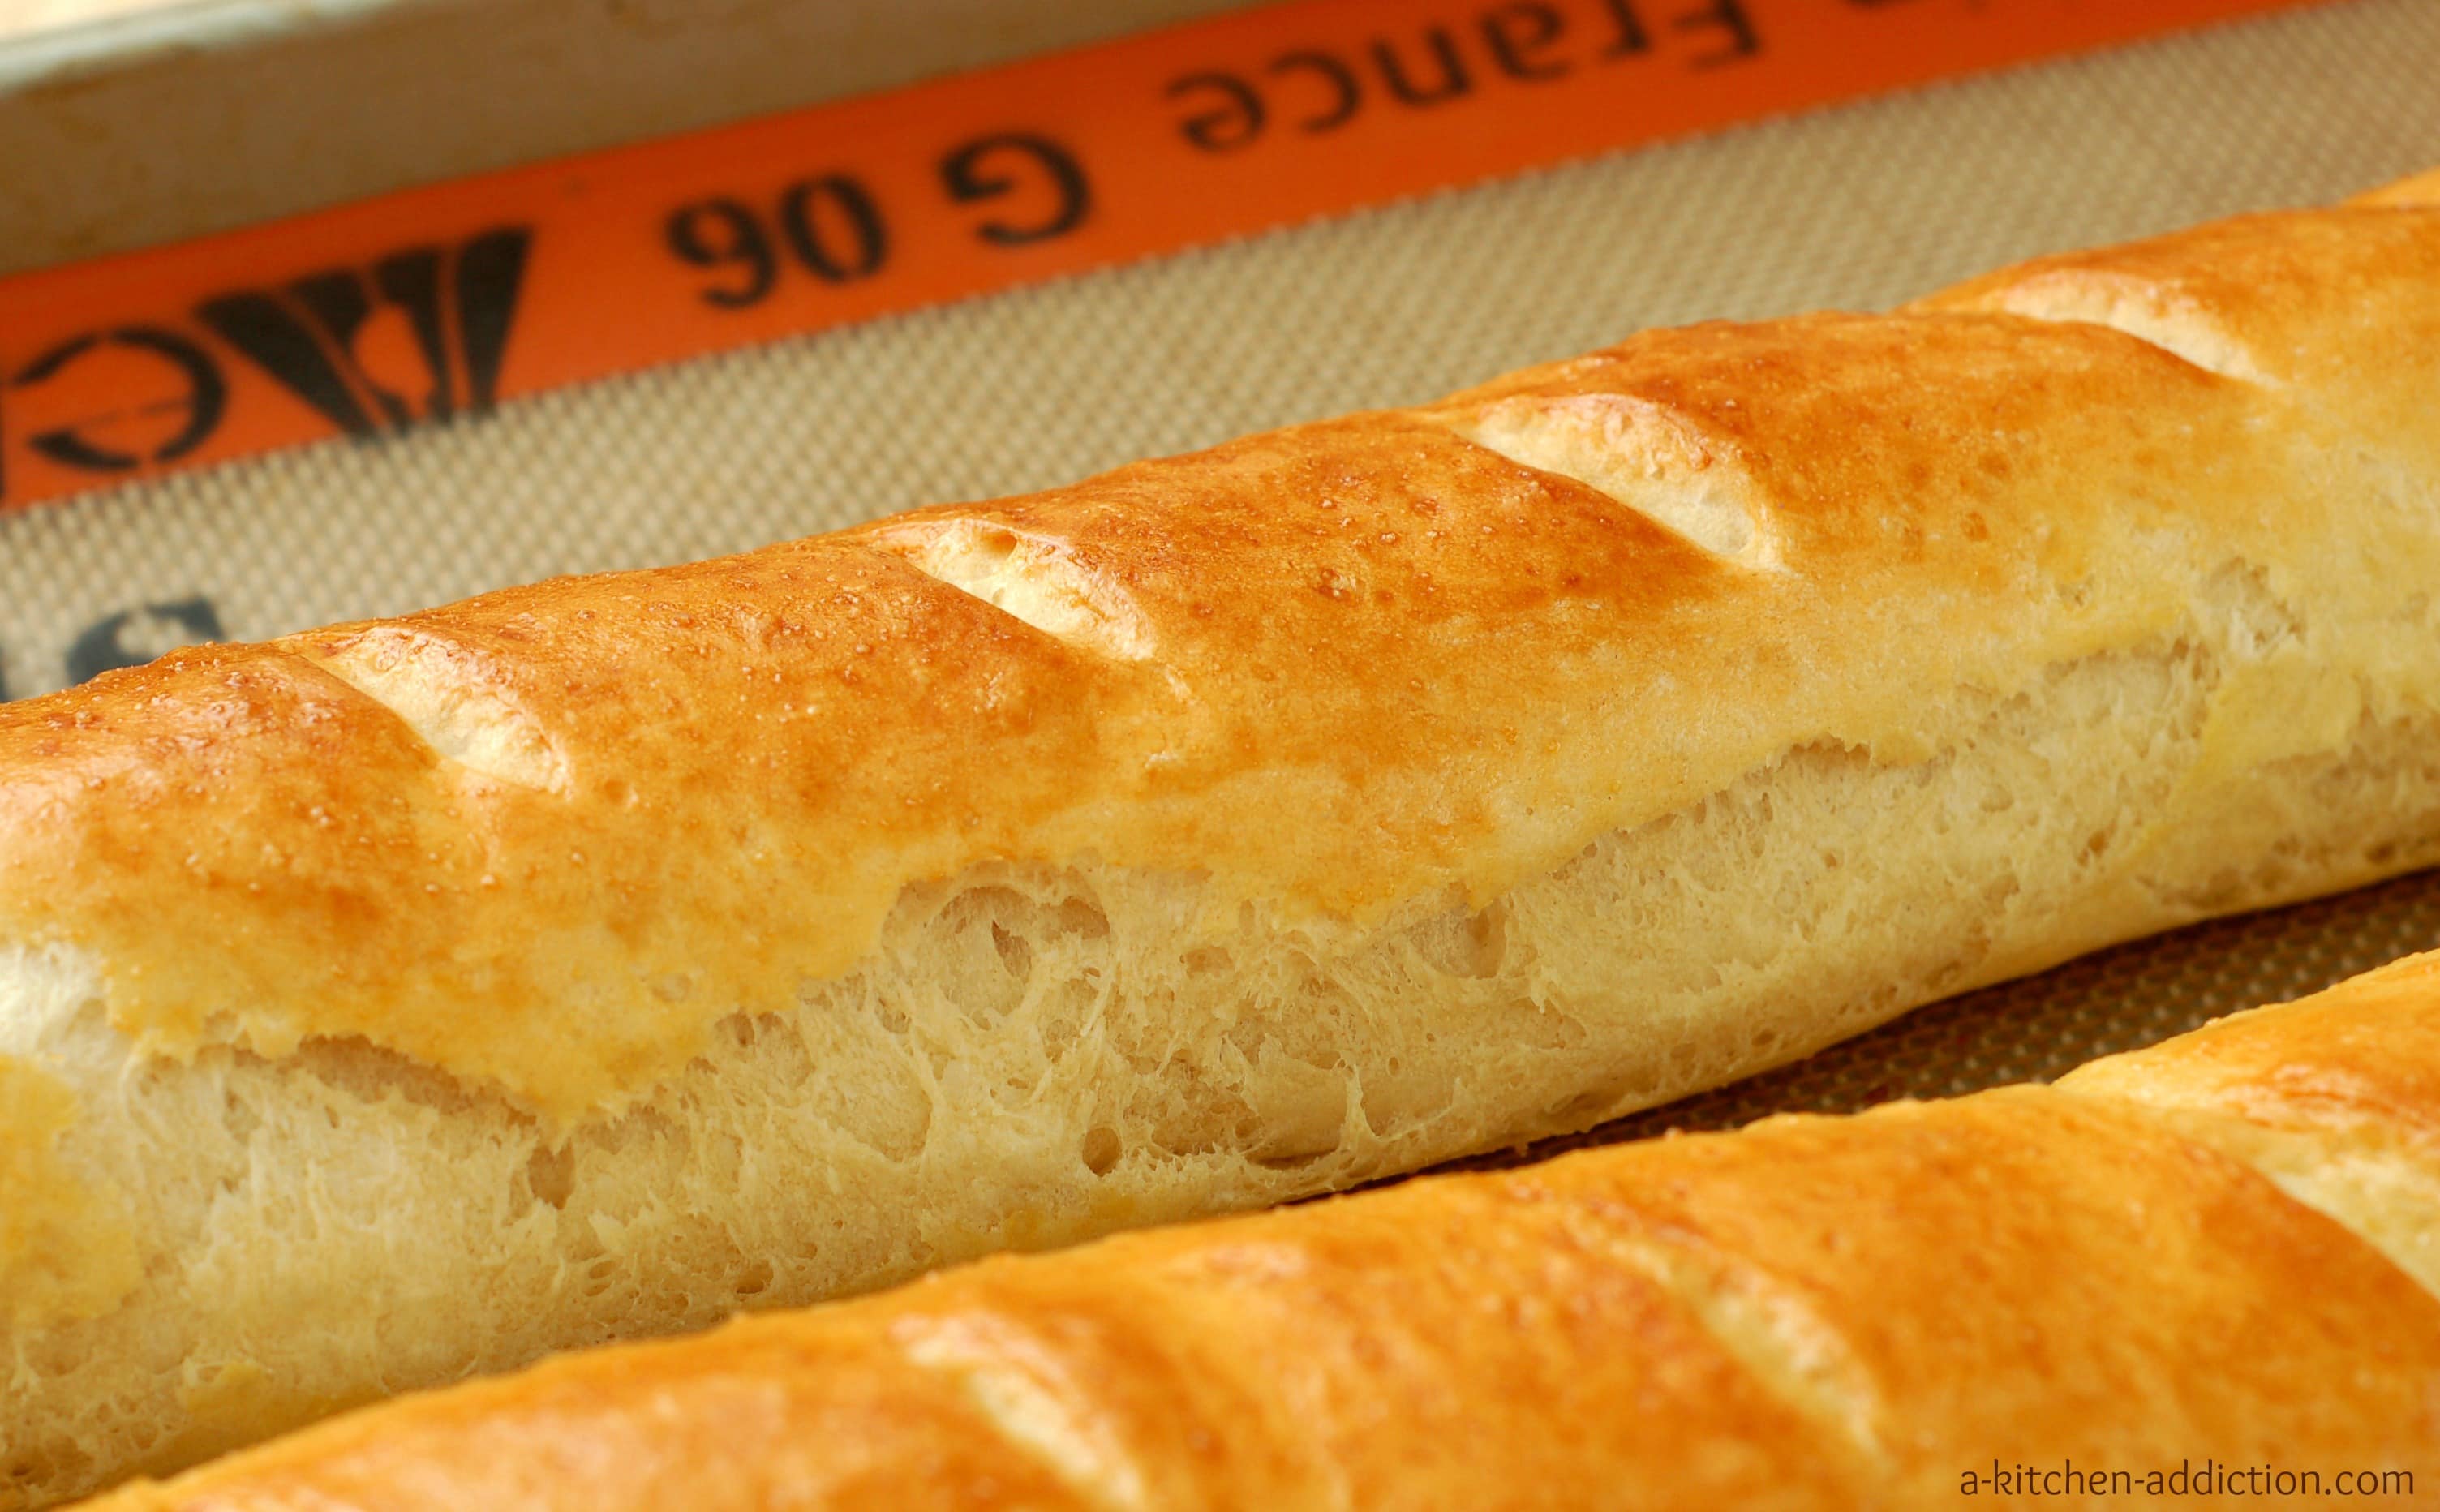 Homemade FRENCH BAGUETTE- HOW TO MAKE FRENCH BAGUETTE at home